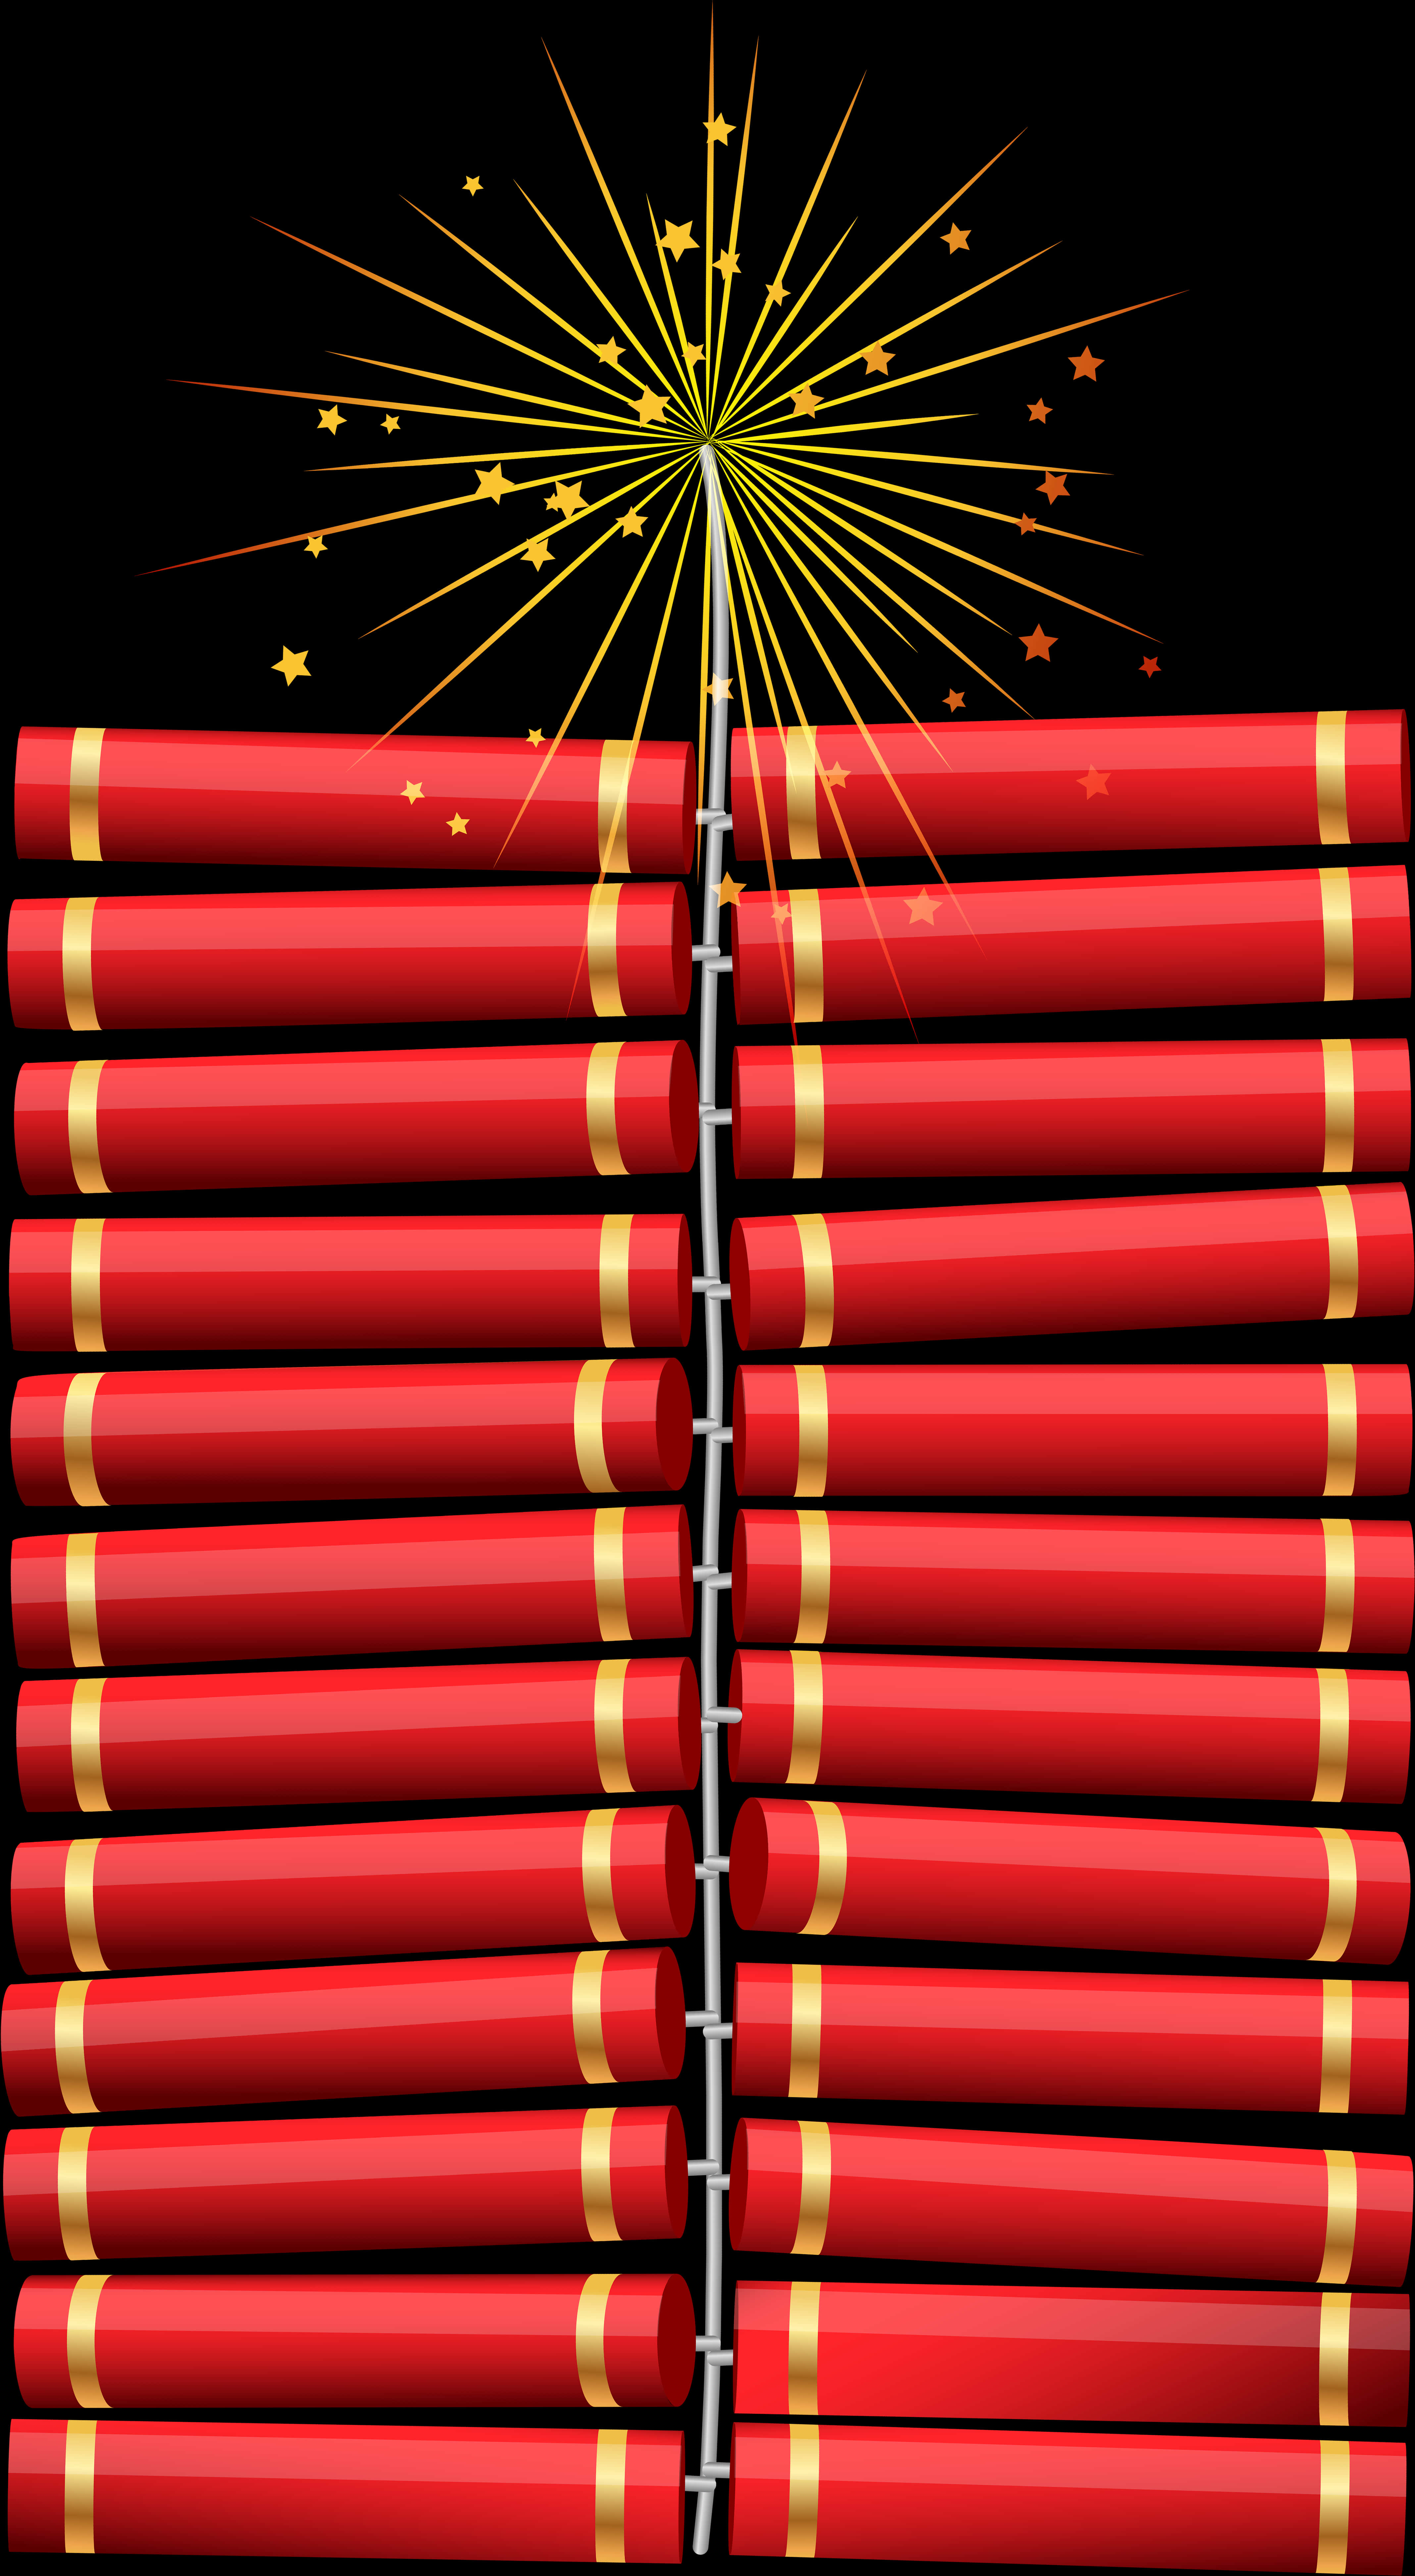 A Group Of Red Sticks With Gold Trim